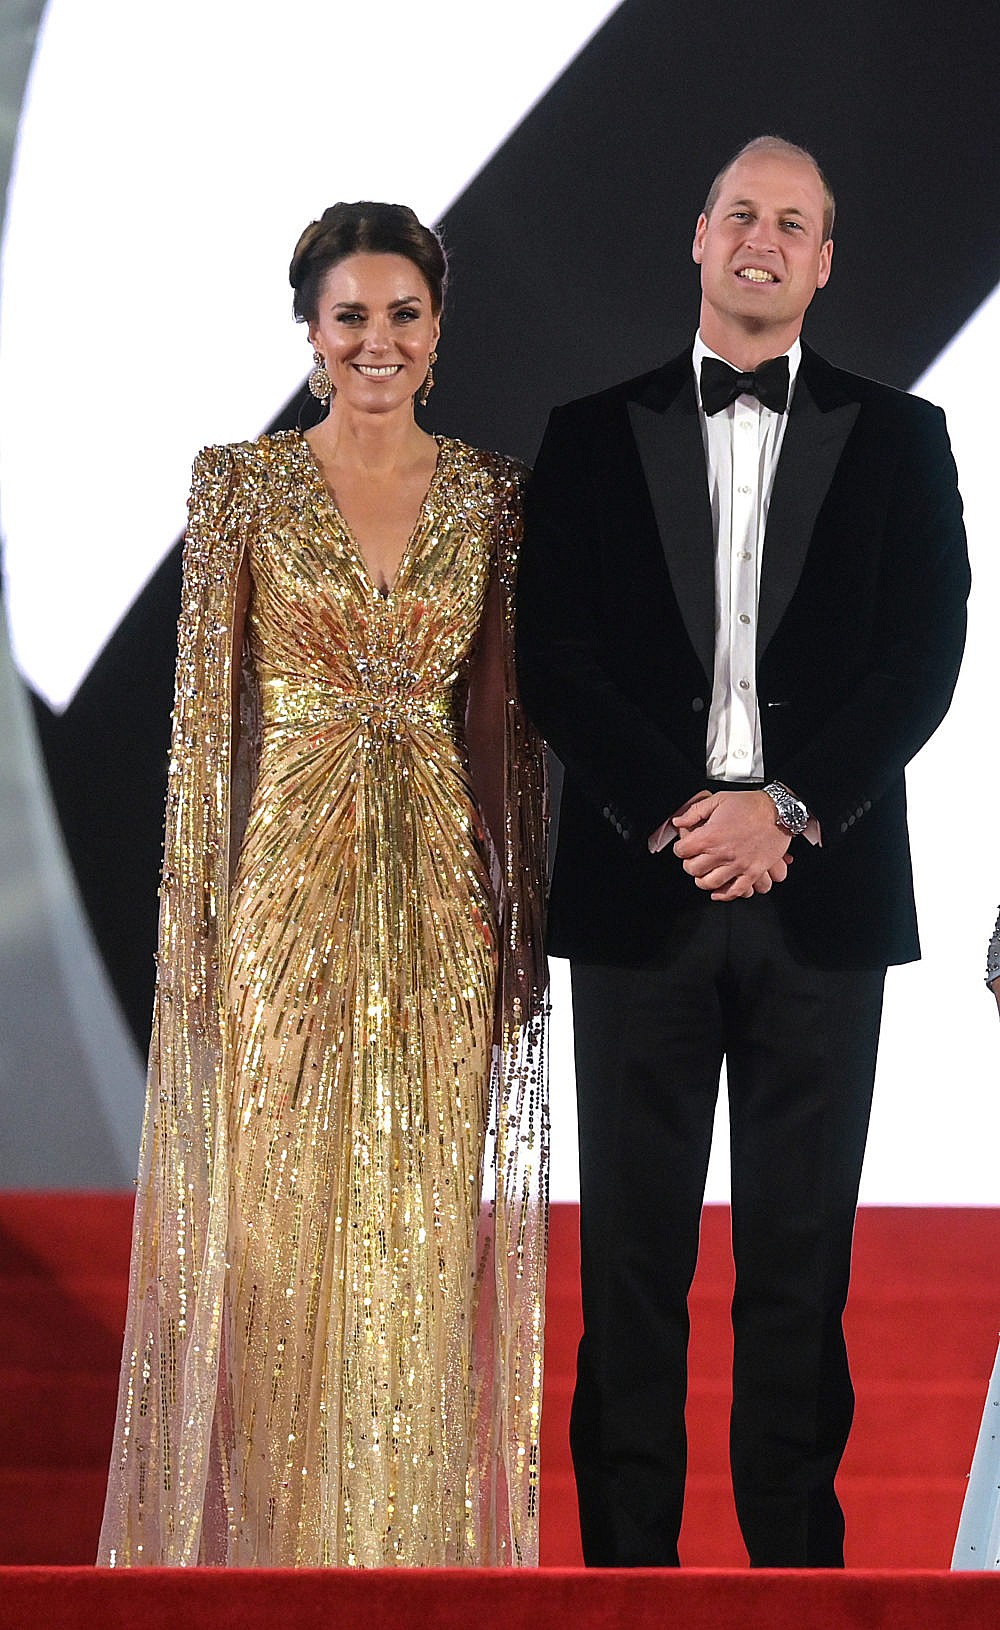 The Duke and Duchess of Cambridge attend the "No Time To Die" World Premiere at Royal Albert Hall on September 28, 2021 in London, England. (Photo: Gareth Cattermole/Getty Images)